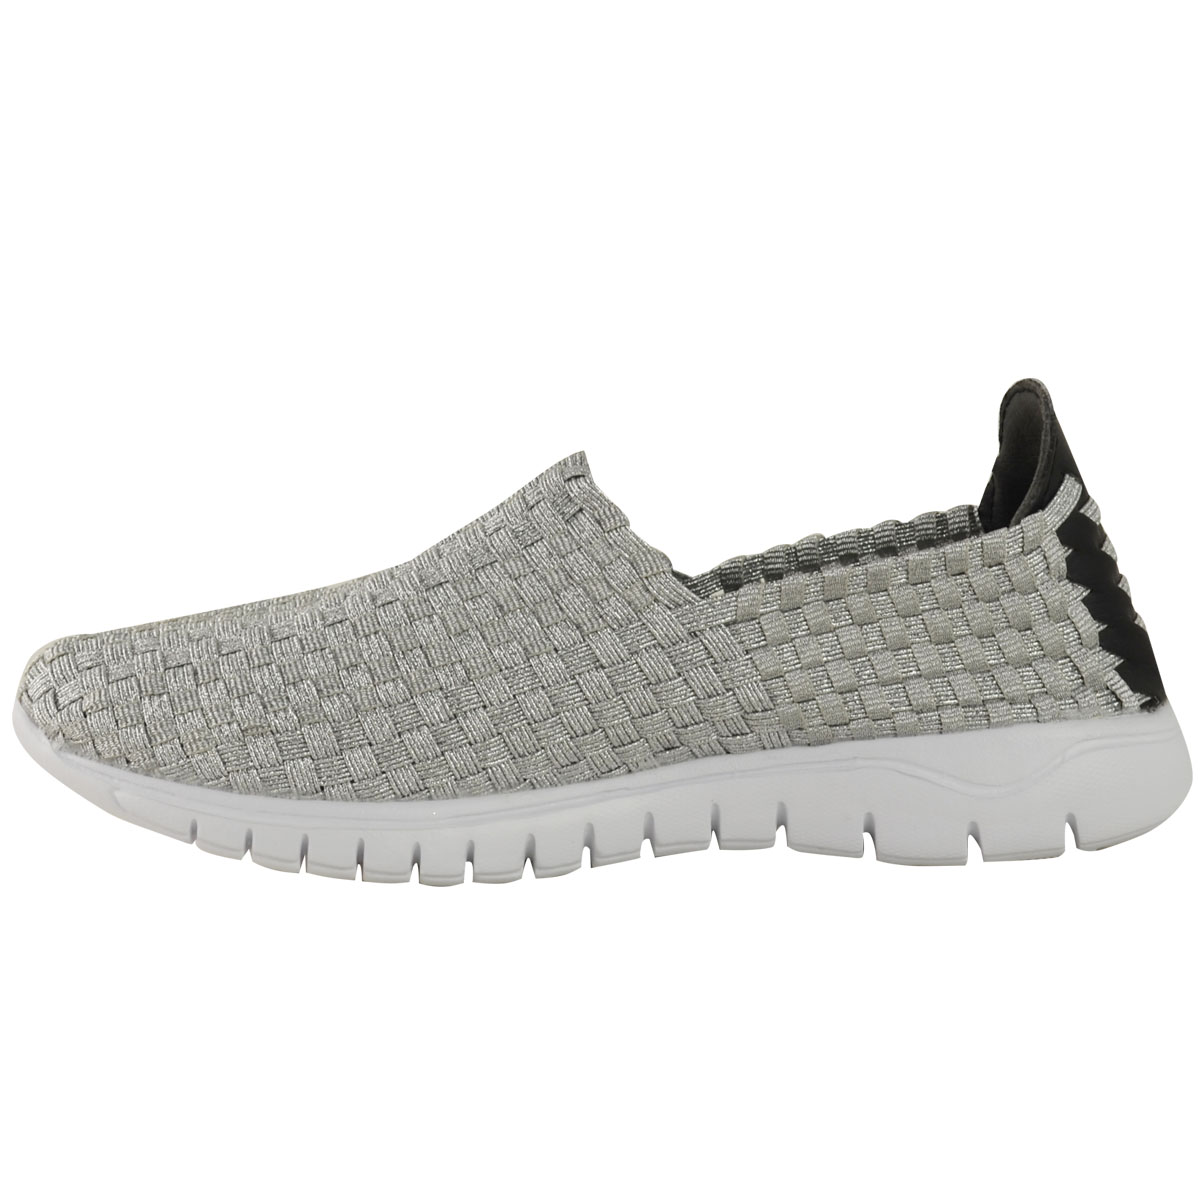 Ladies Womens Slip On Casual Walking Running Woven Gym Pumps Trainers Shoes Size